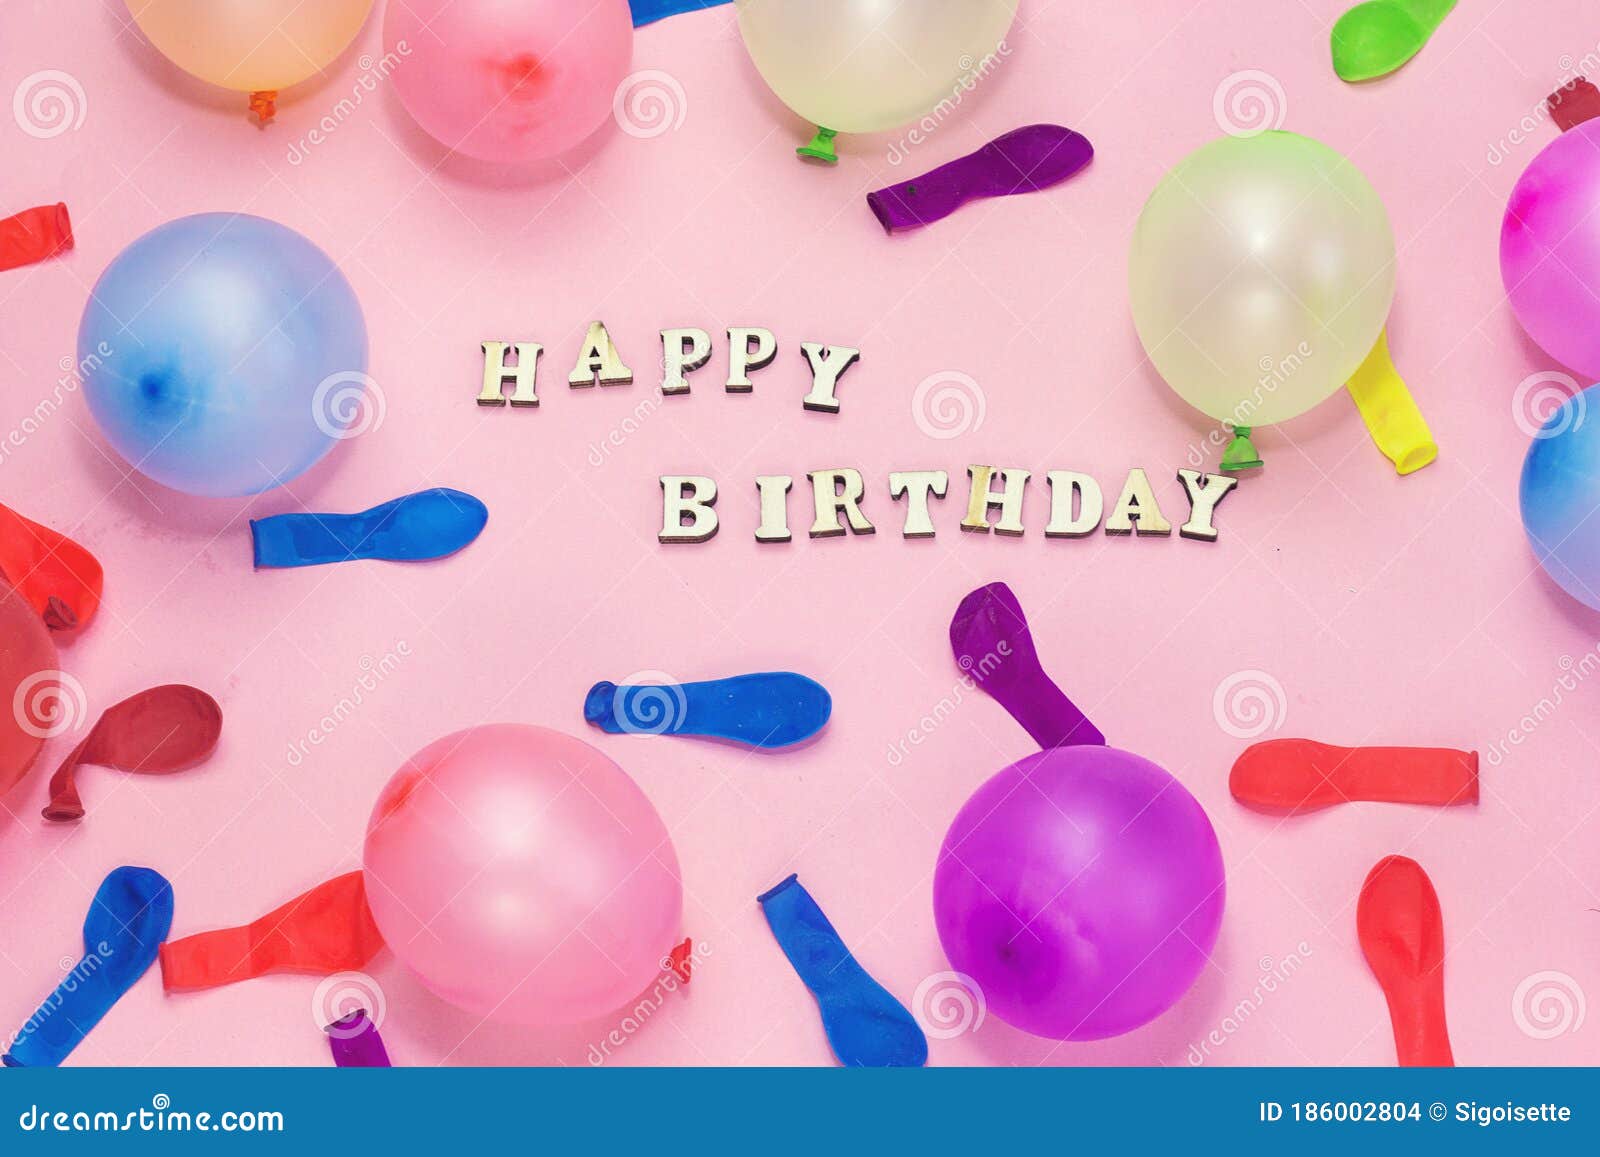 Wooden Letters Forming Happy Birthday and Colorful Ballons on Pink ...